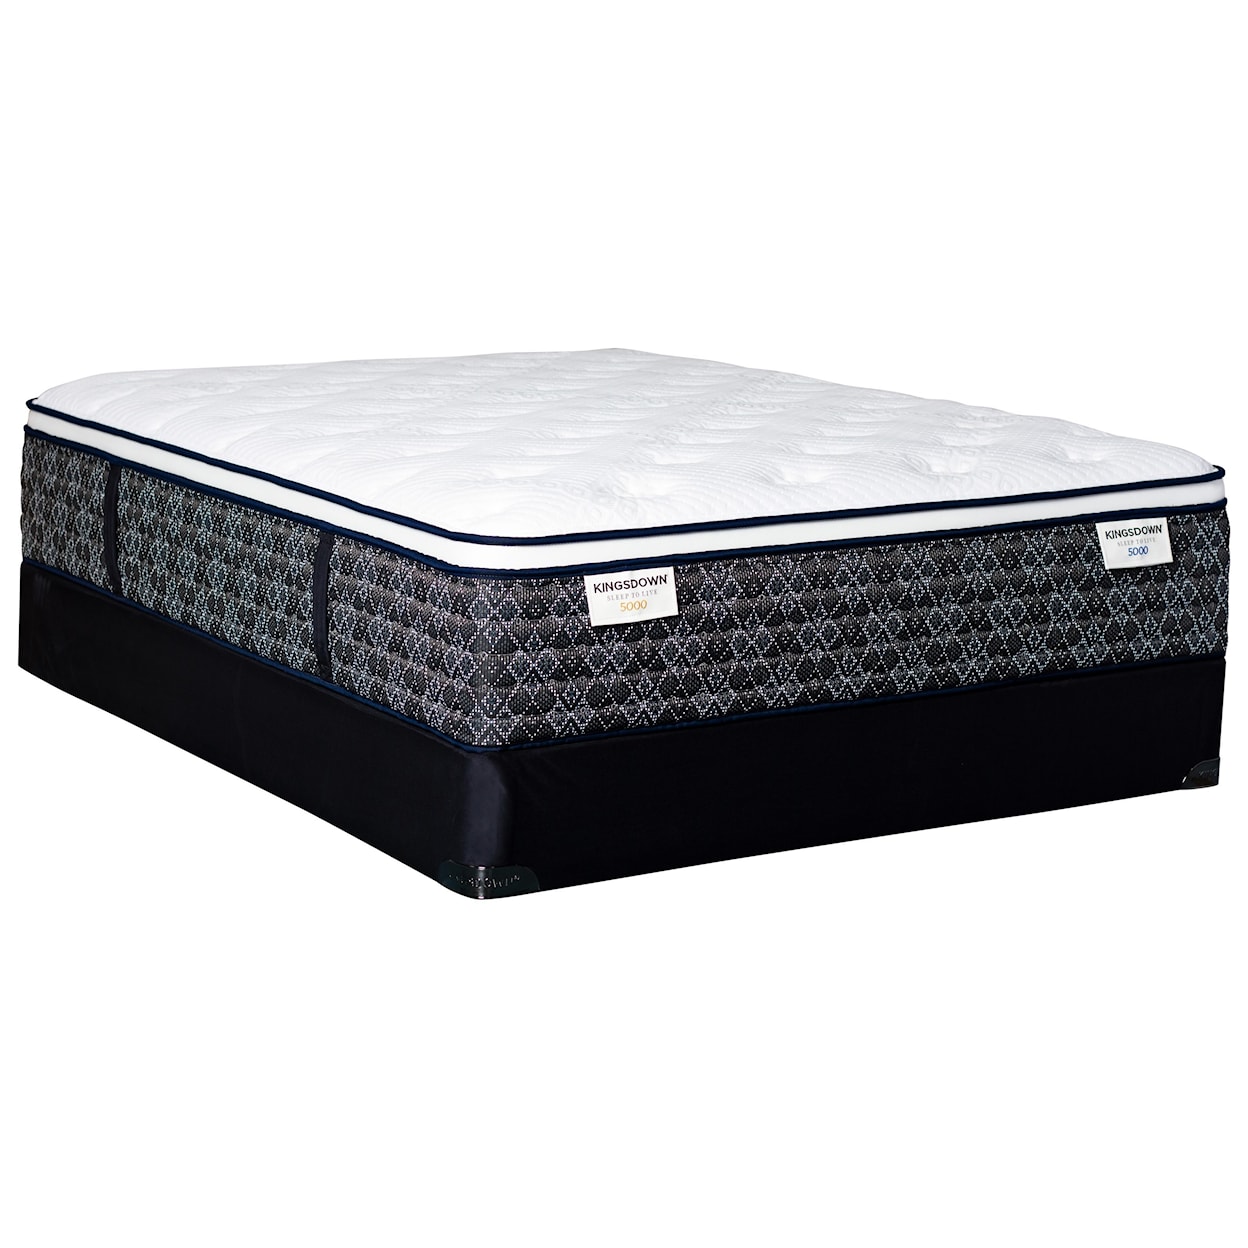 Kingsdown Sleep to Live 5000 Gold Blue ET Queen Pocketed Coil Mattress LoPro Set